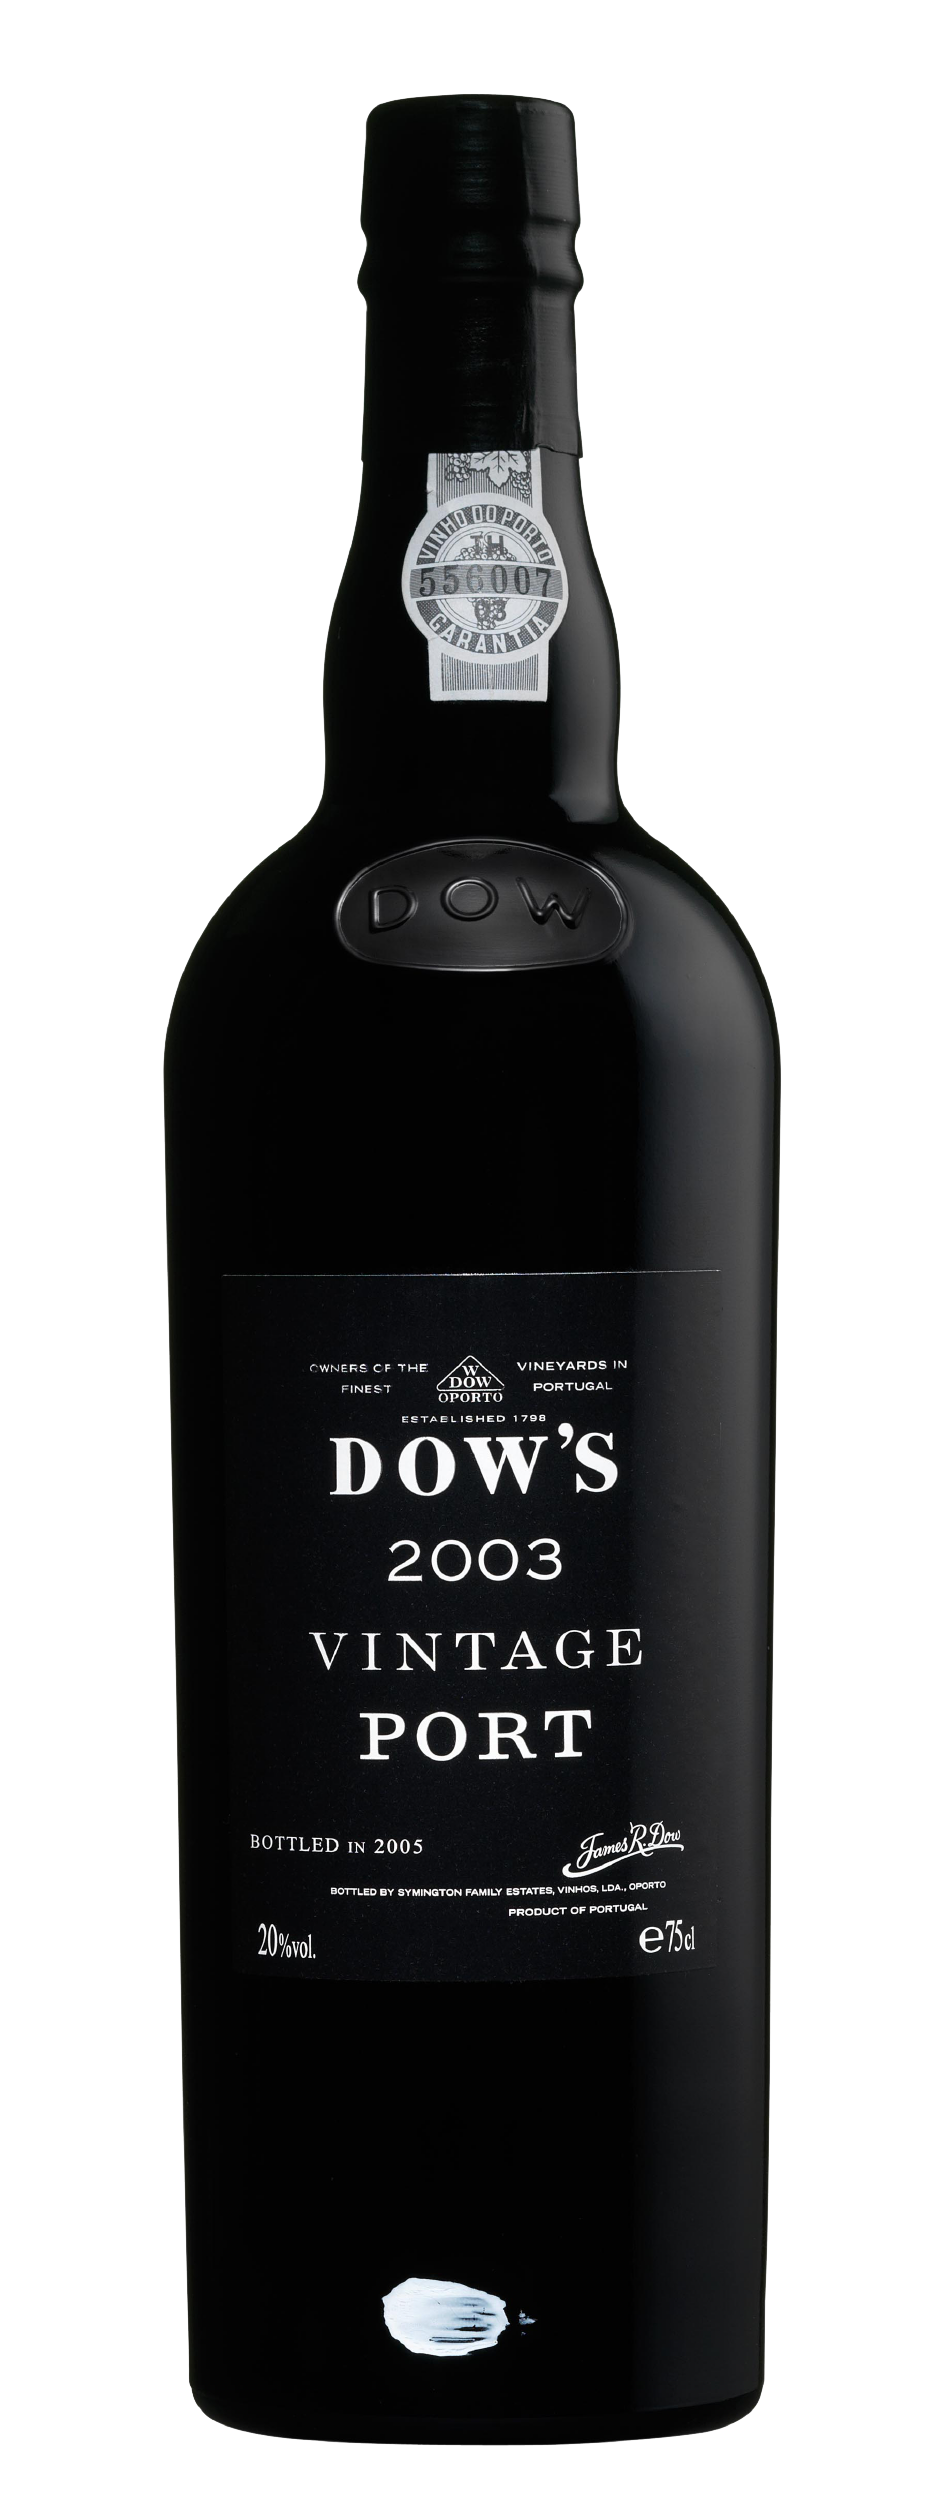 Product Image for DOW'S VINTAGE PORT 2003